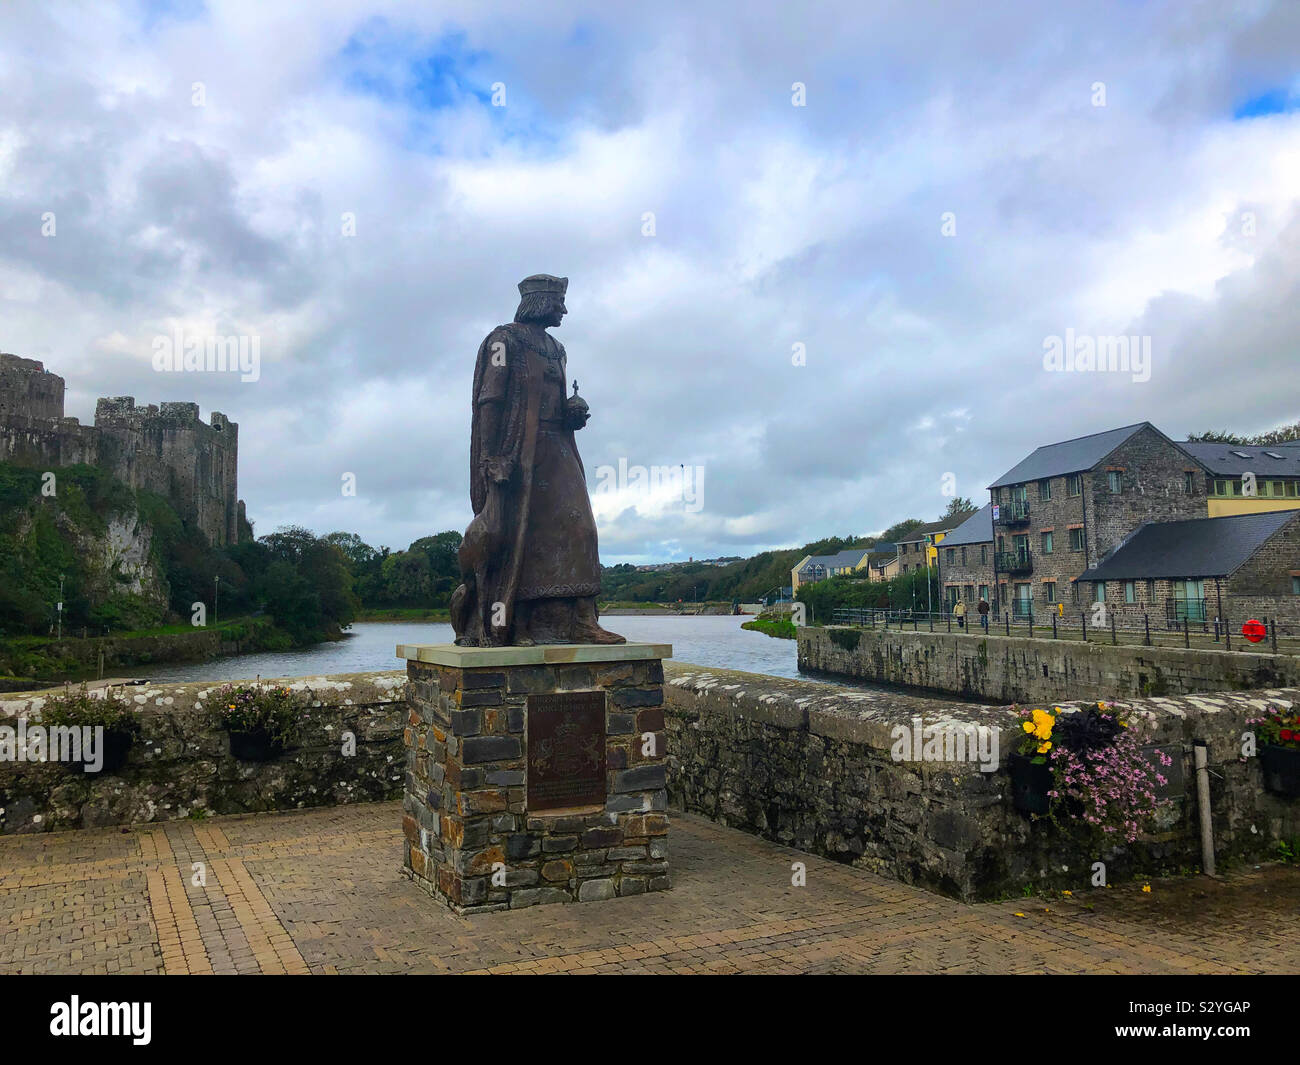 Statue of King Henry VII by Castle Pond, and with Pembroke Castle on the left at Pembroke, Pembrokeshire, Wales, UK. Stock Photo